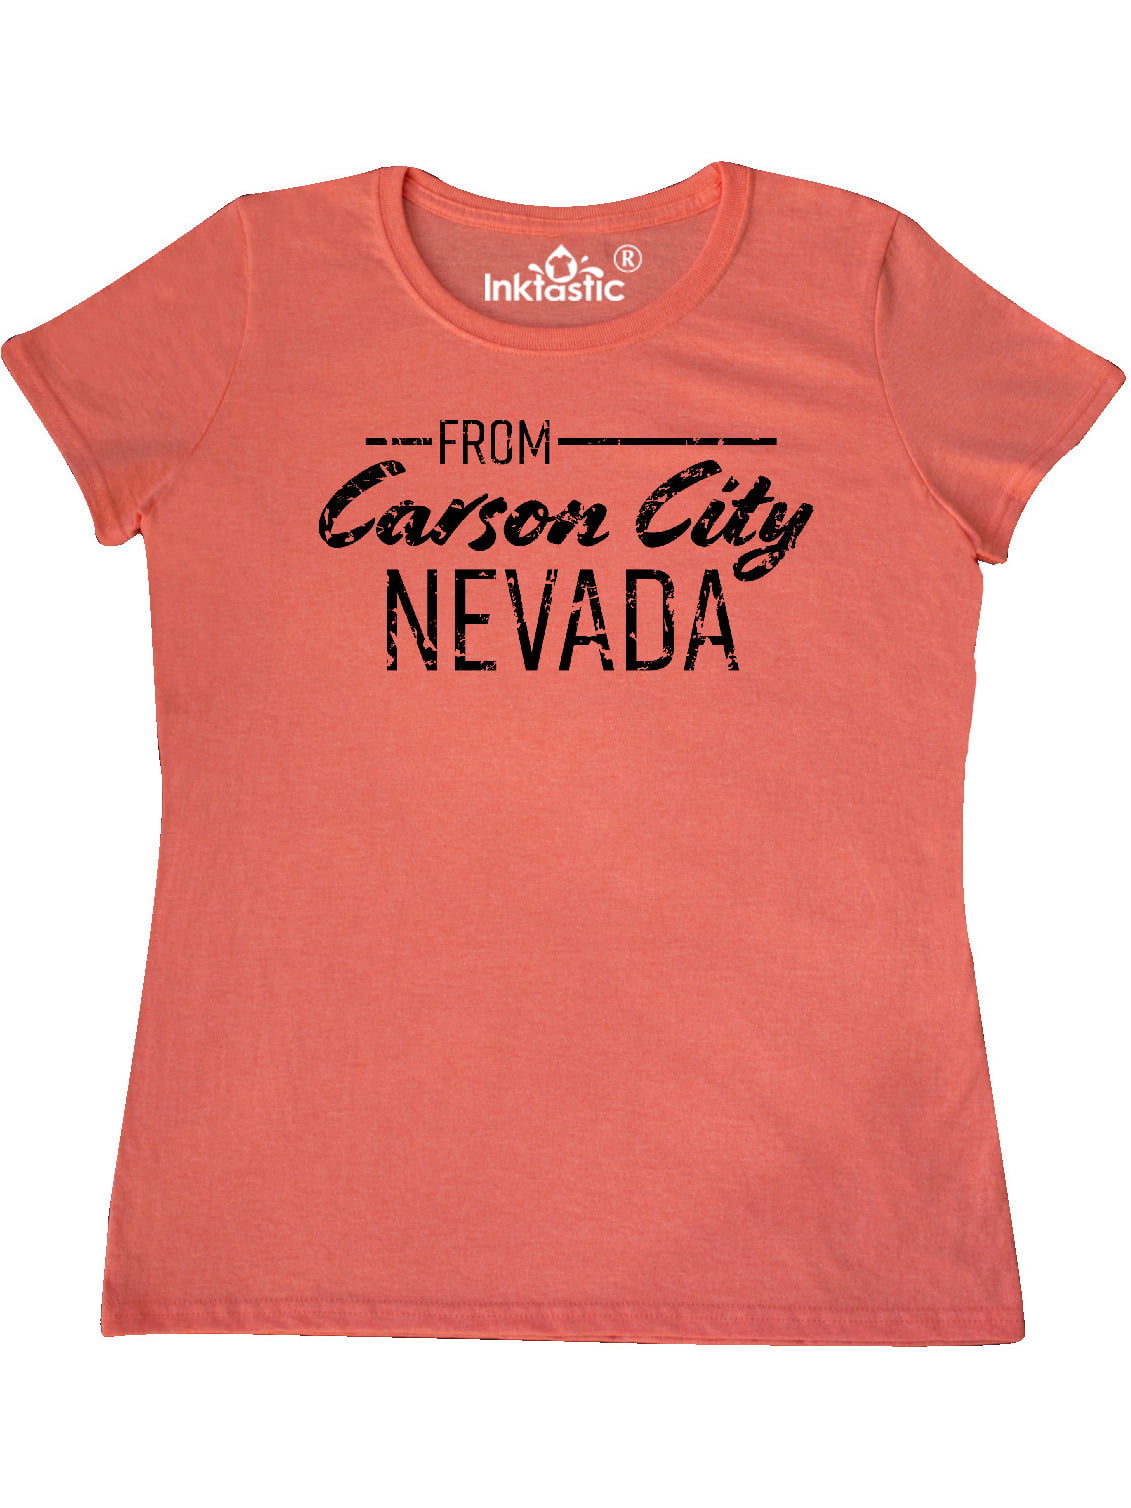 Inktastic From Carson City Nevada in Black Distressed Text Adult Women's T- Shirt Female Retro Heather Coral L - Walmart.com